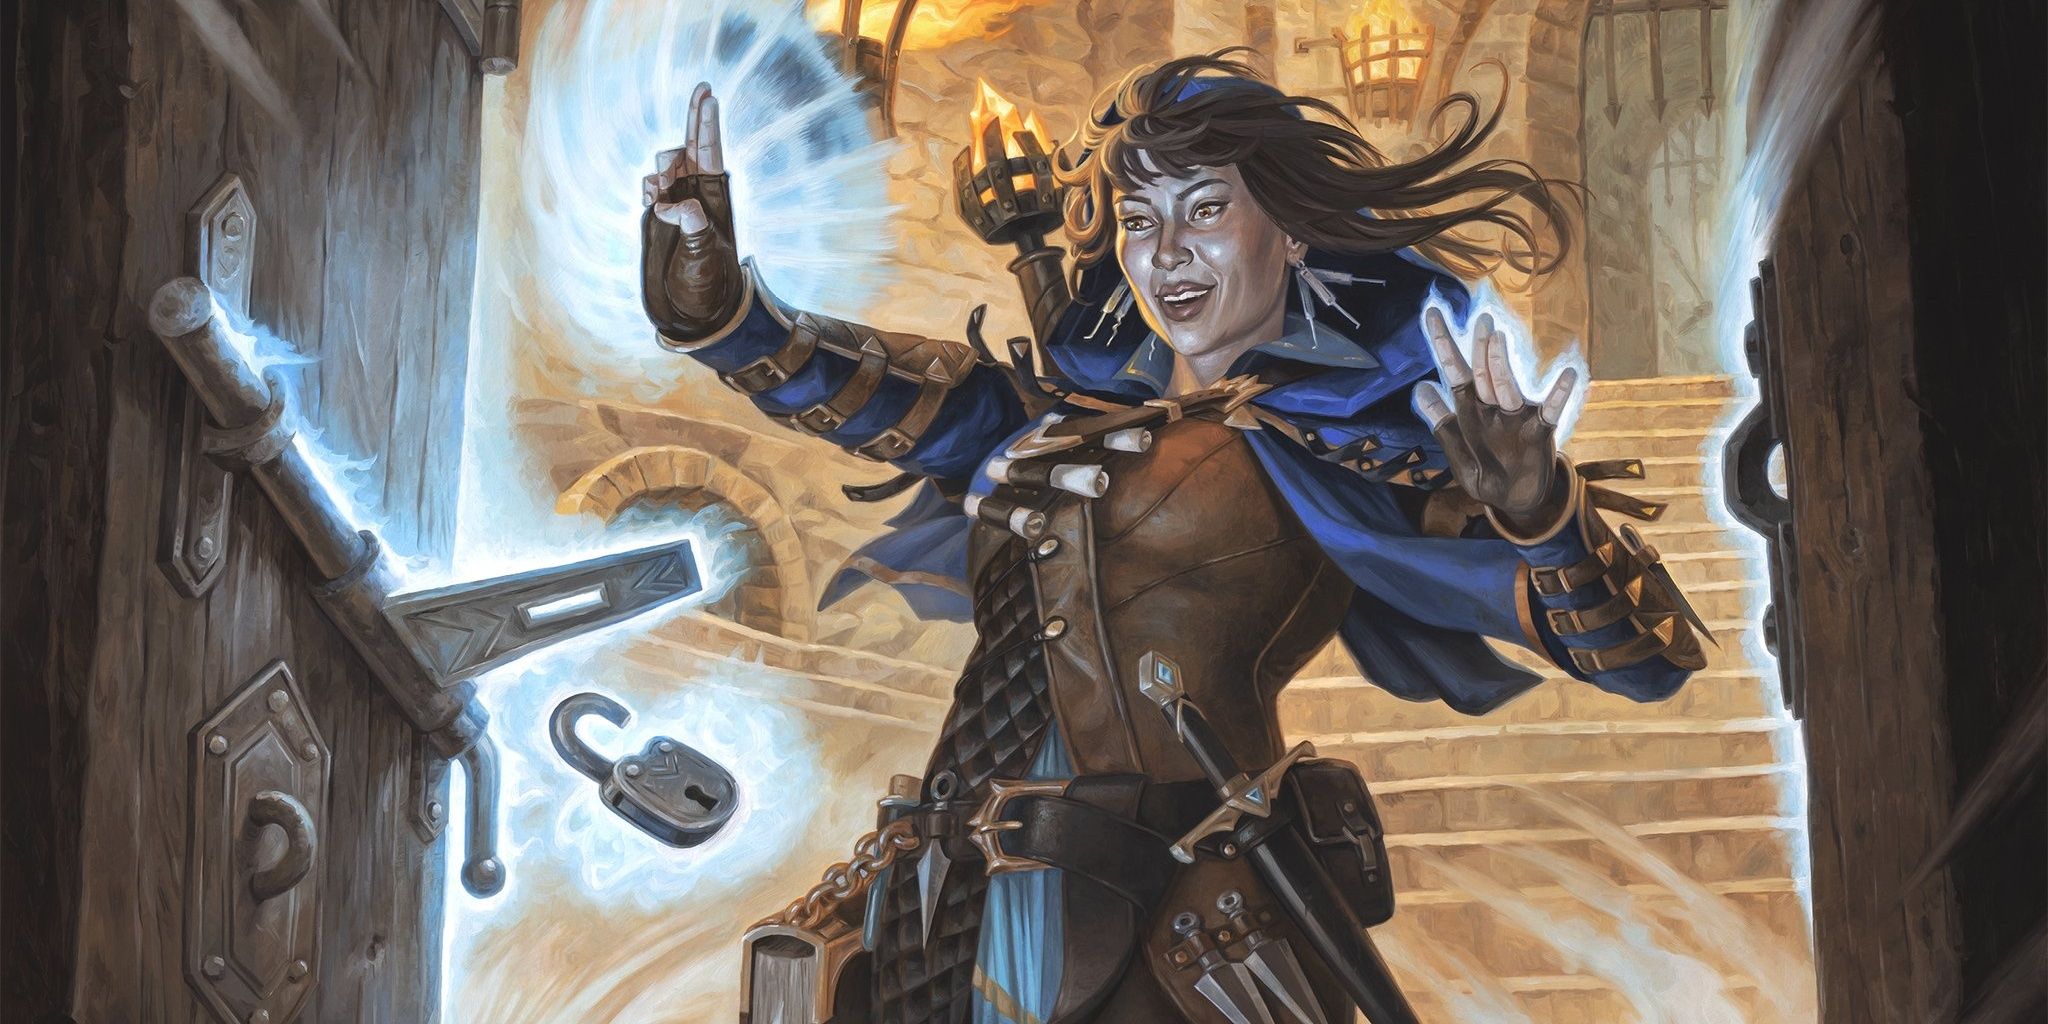 Dungeons & Dragons: In Imoen, Mystic Trickster by Alix Branwyn, a rogue disables a lock with magic